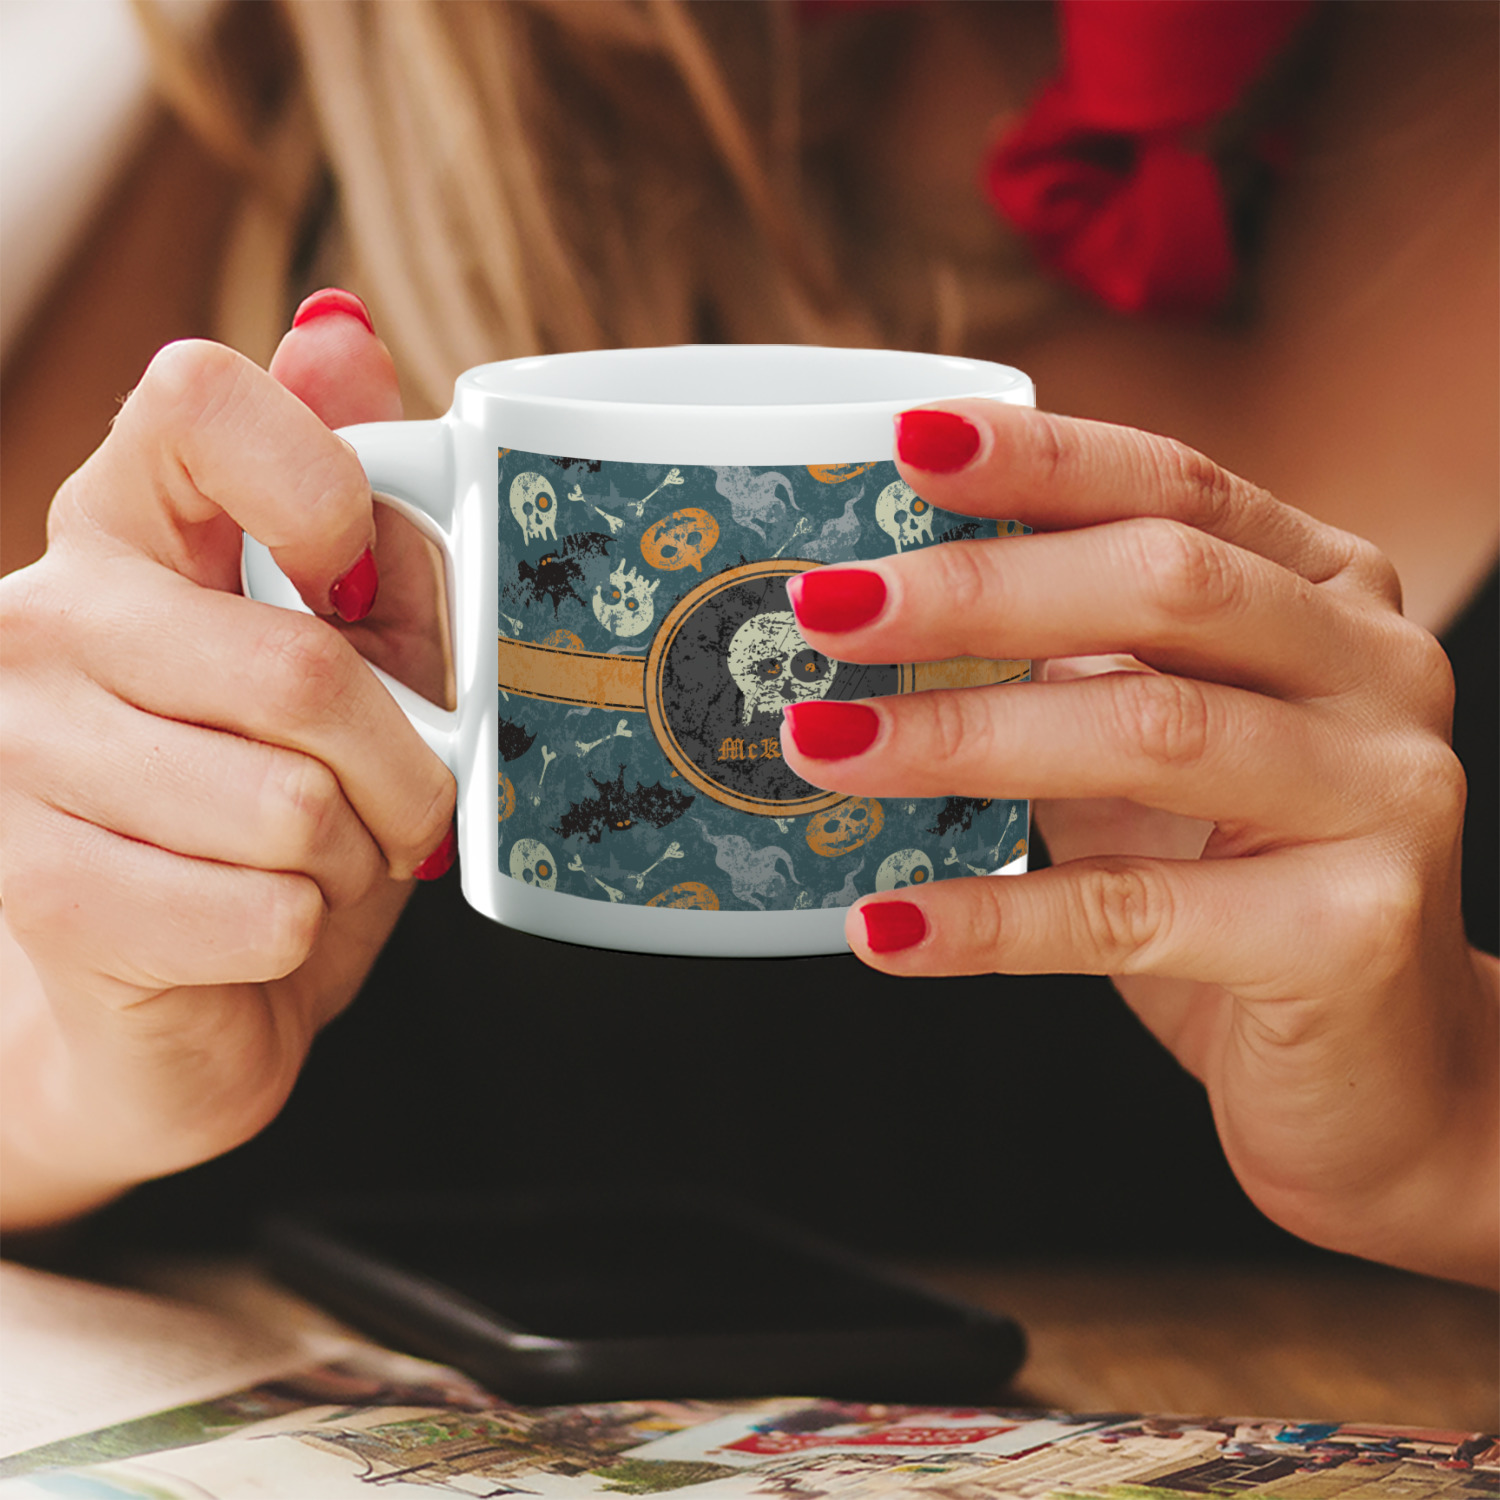 https://www.youcustomizeit.com/common/MAKE/285858/Vintage-Grunge-Halloween-Espresso-Cup-6oz-Double-Shot-LIFESTYLE-Woman-hands-cropped.jpg?lm=1666304976